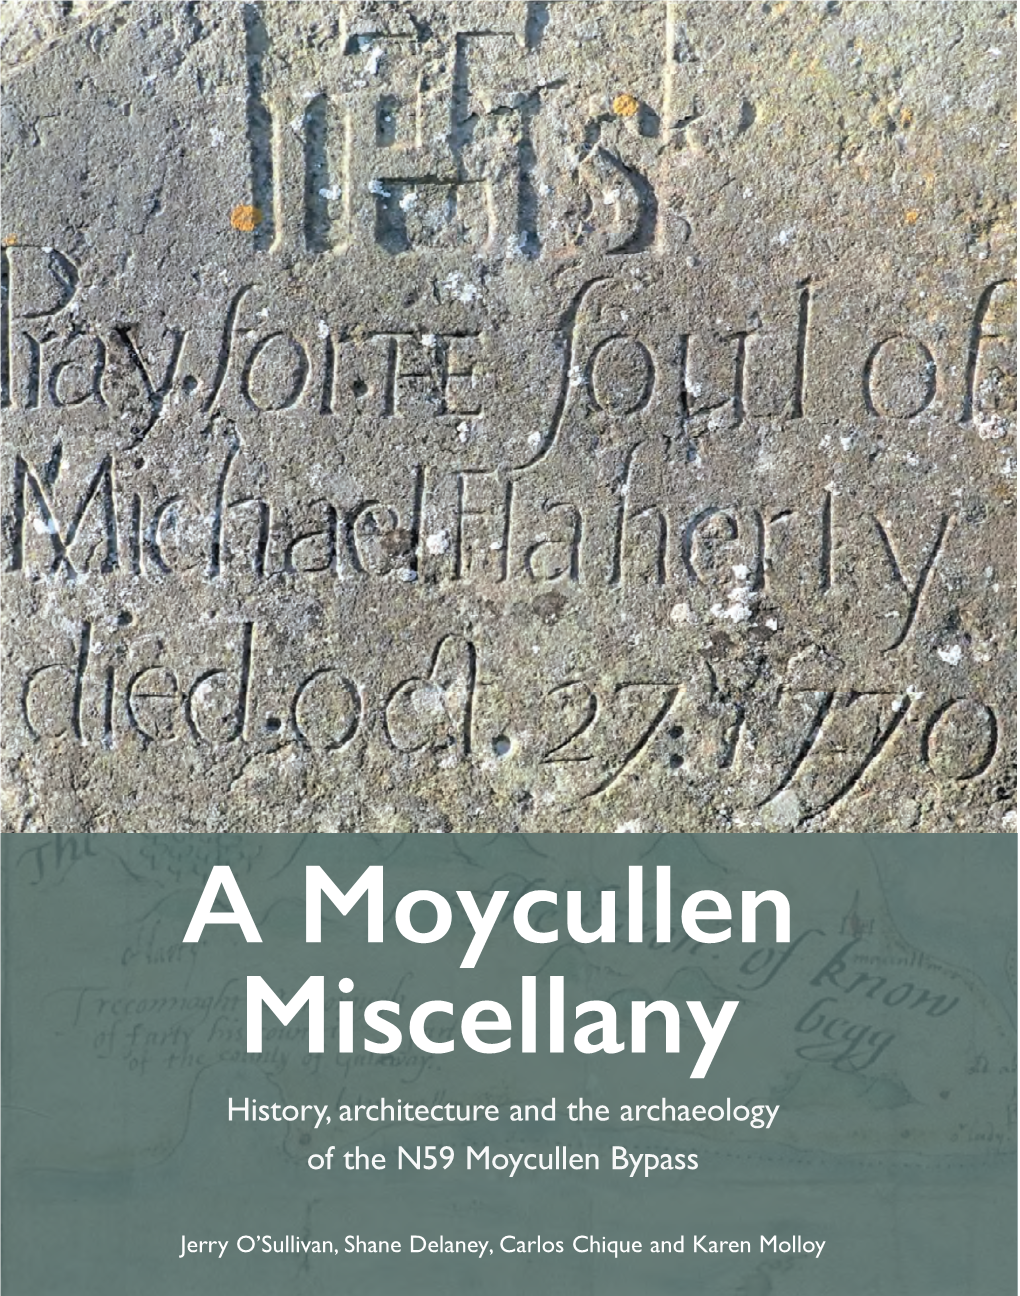 A Moycullen Miscellany: History, Architecture and the Archaeology of the N59 Moycullen Bypass TII Heritage 8